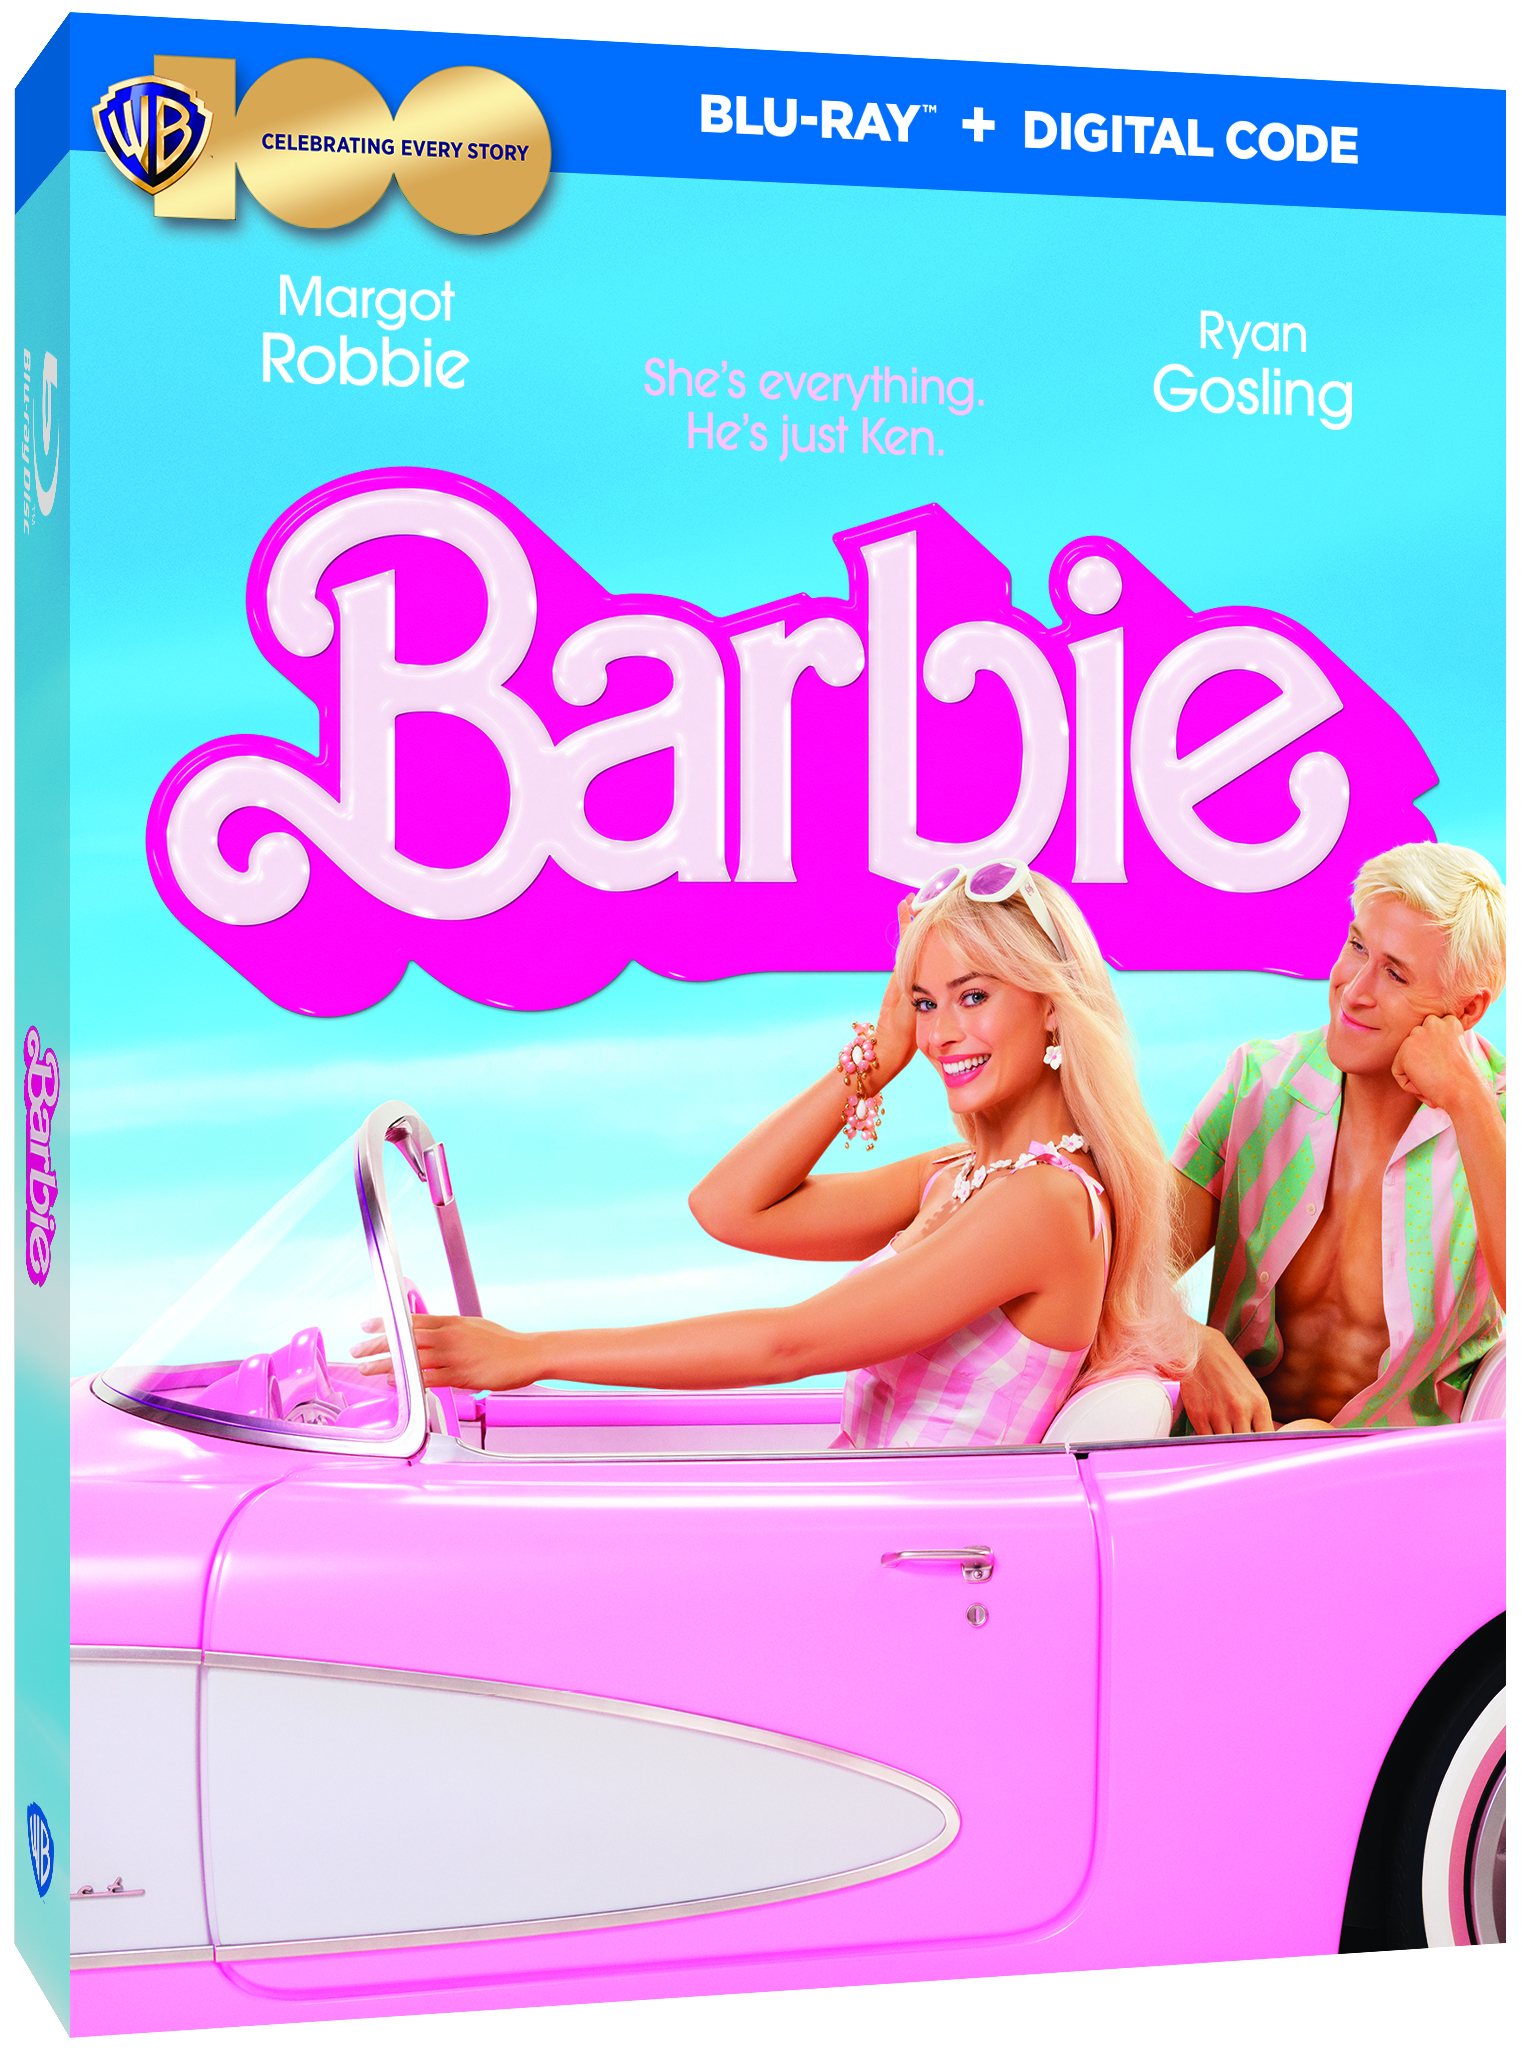 Warner Bros. Discovery's 'Barbie' Movie Gets Boost From HGTV 'Barbie  Dreamhouse' 07/06/2023